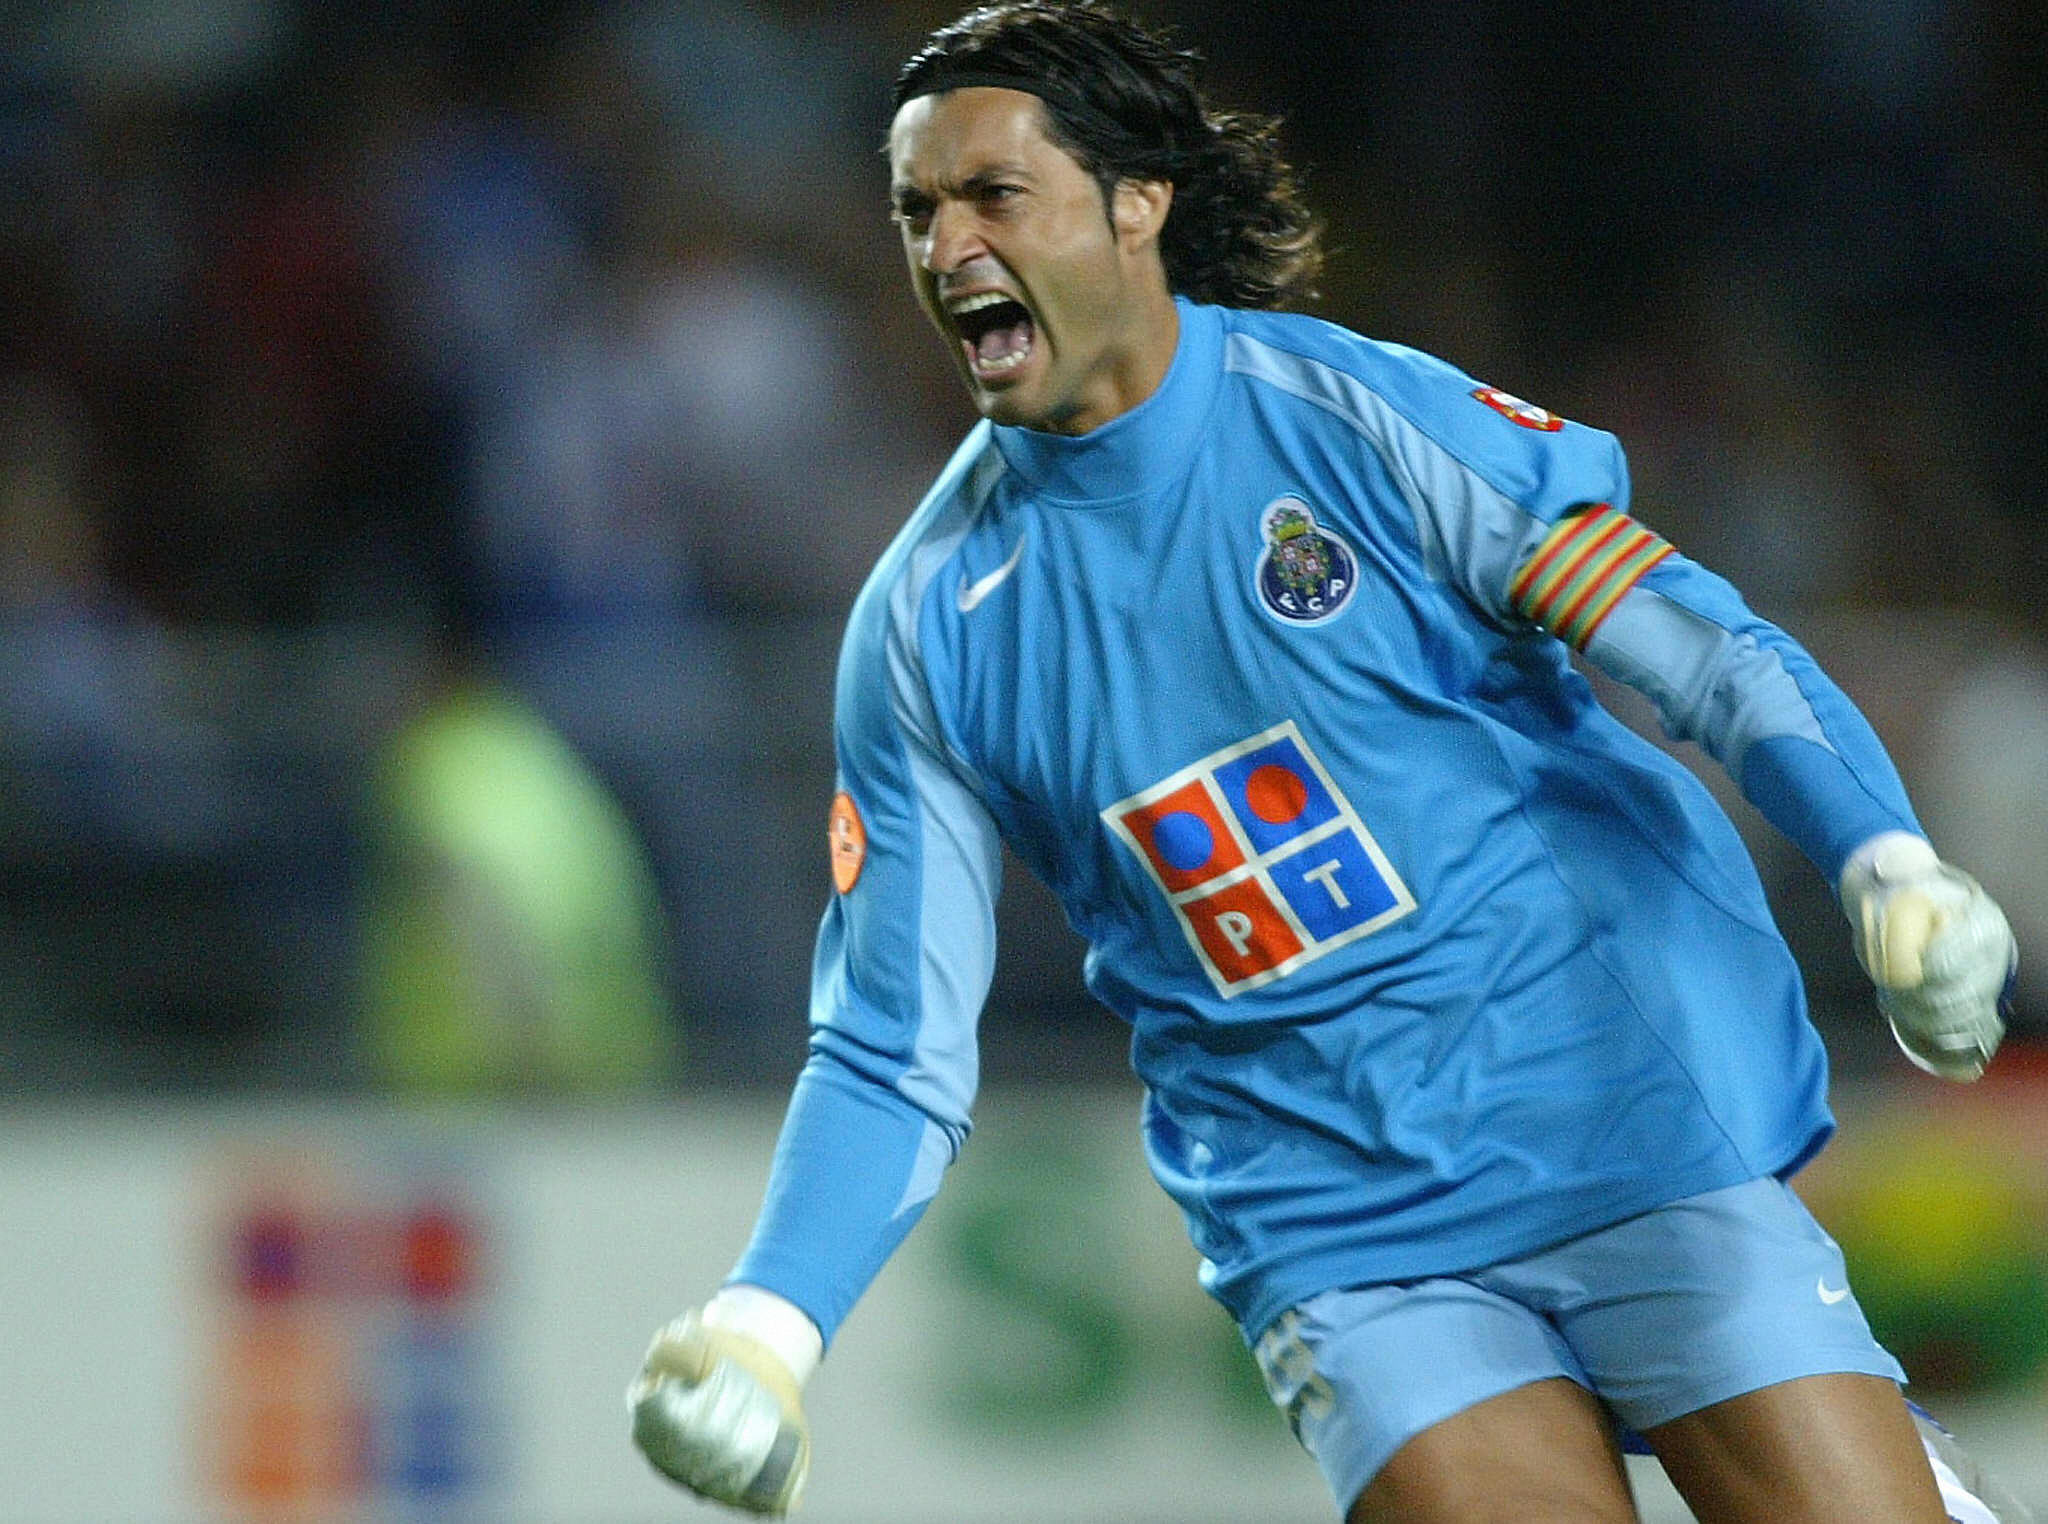 Vitor Baia celebrates a goal for Porto against Benfica in August 2004.